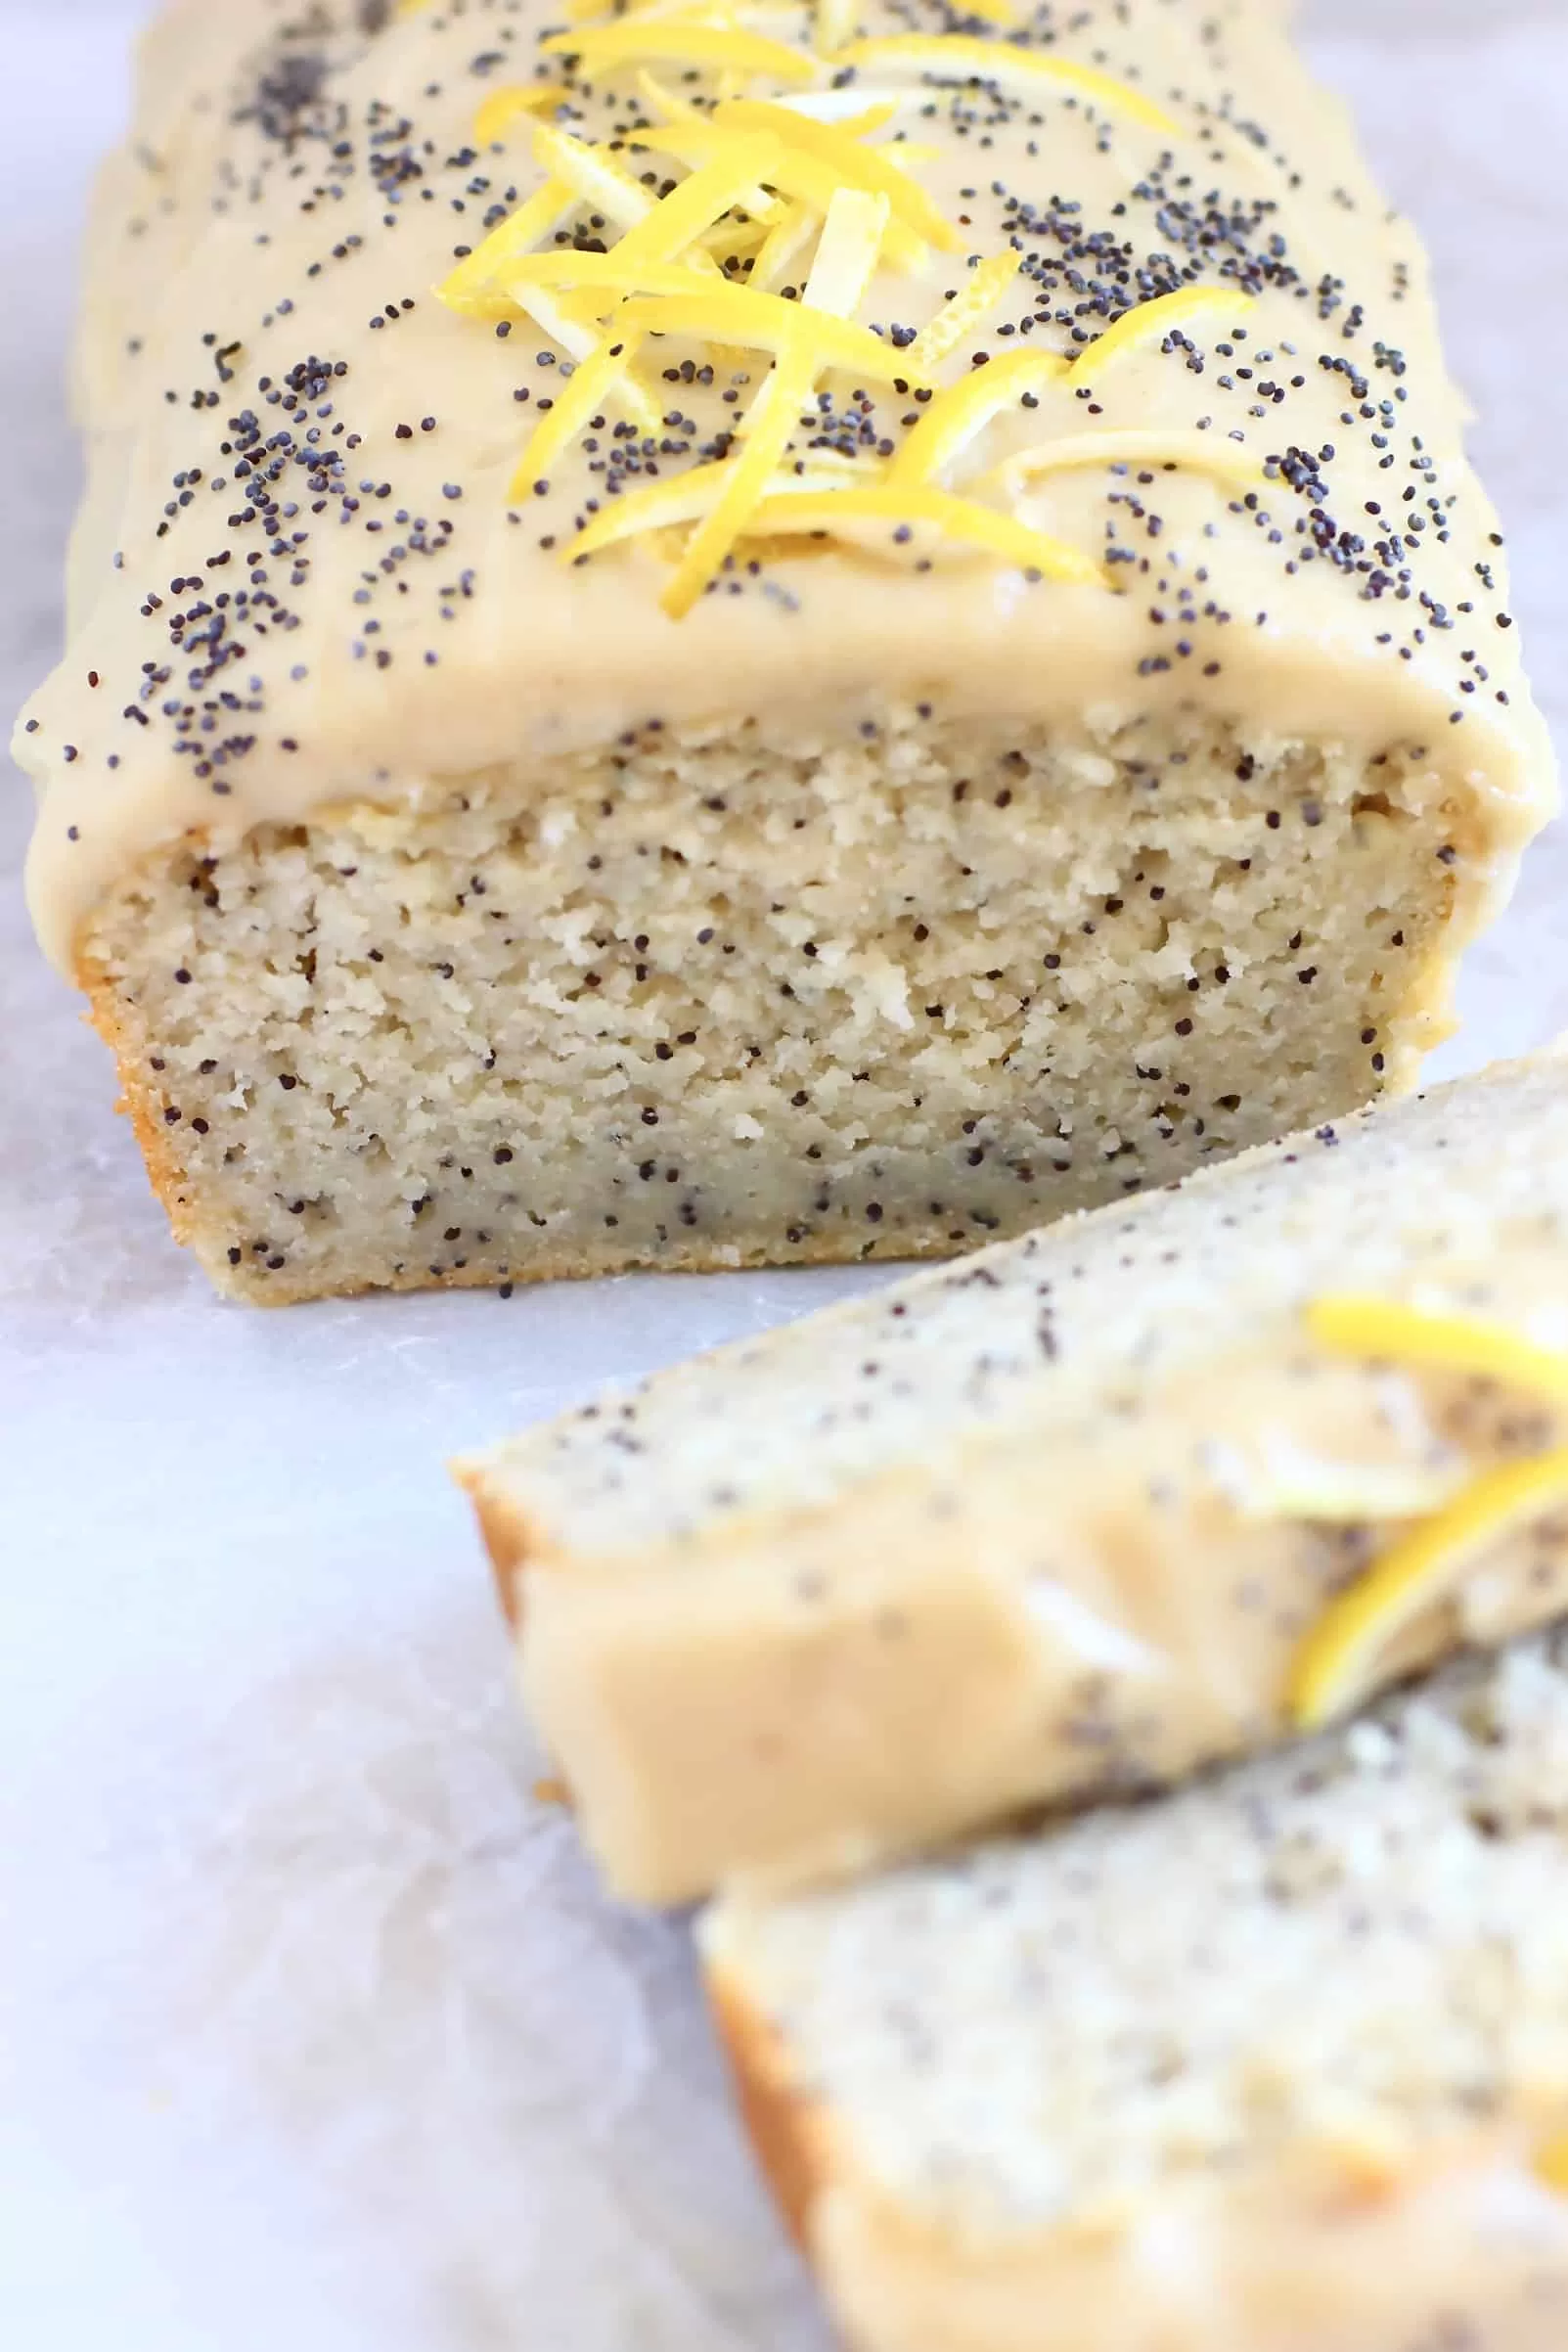 Gluten-free vegan lemon poppy seed cake topped with frosting, lemon zest and poppy seeds with two slices next to it